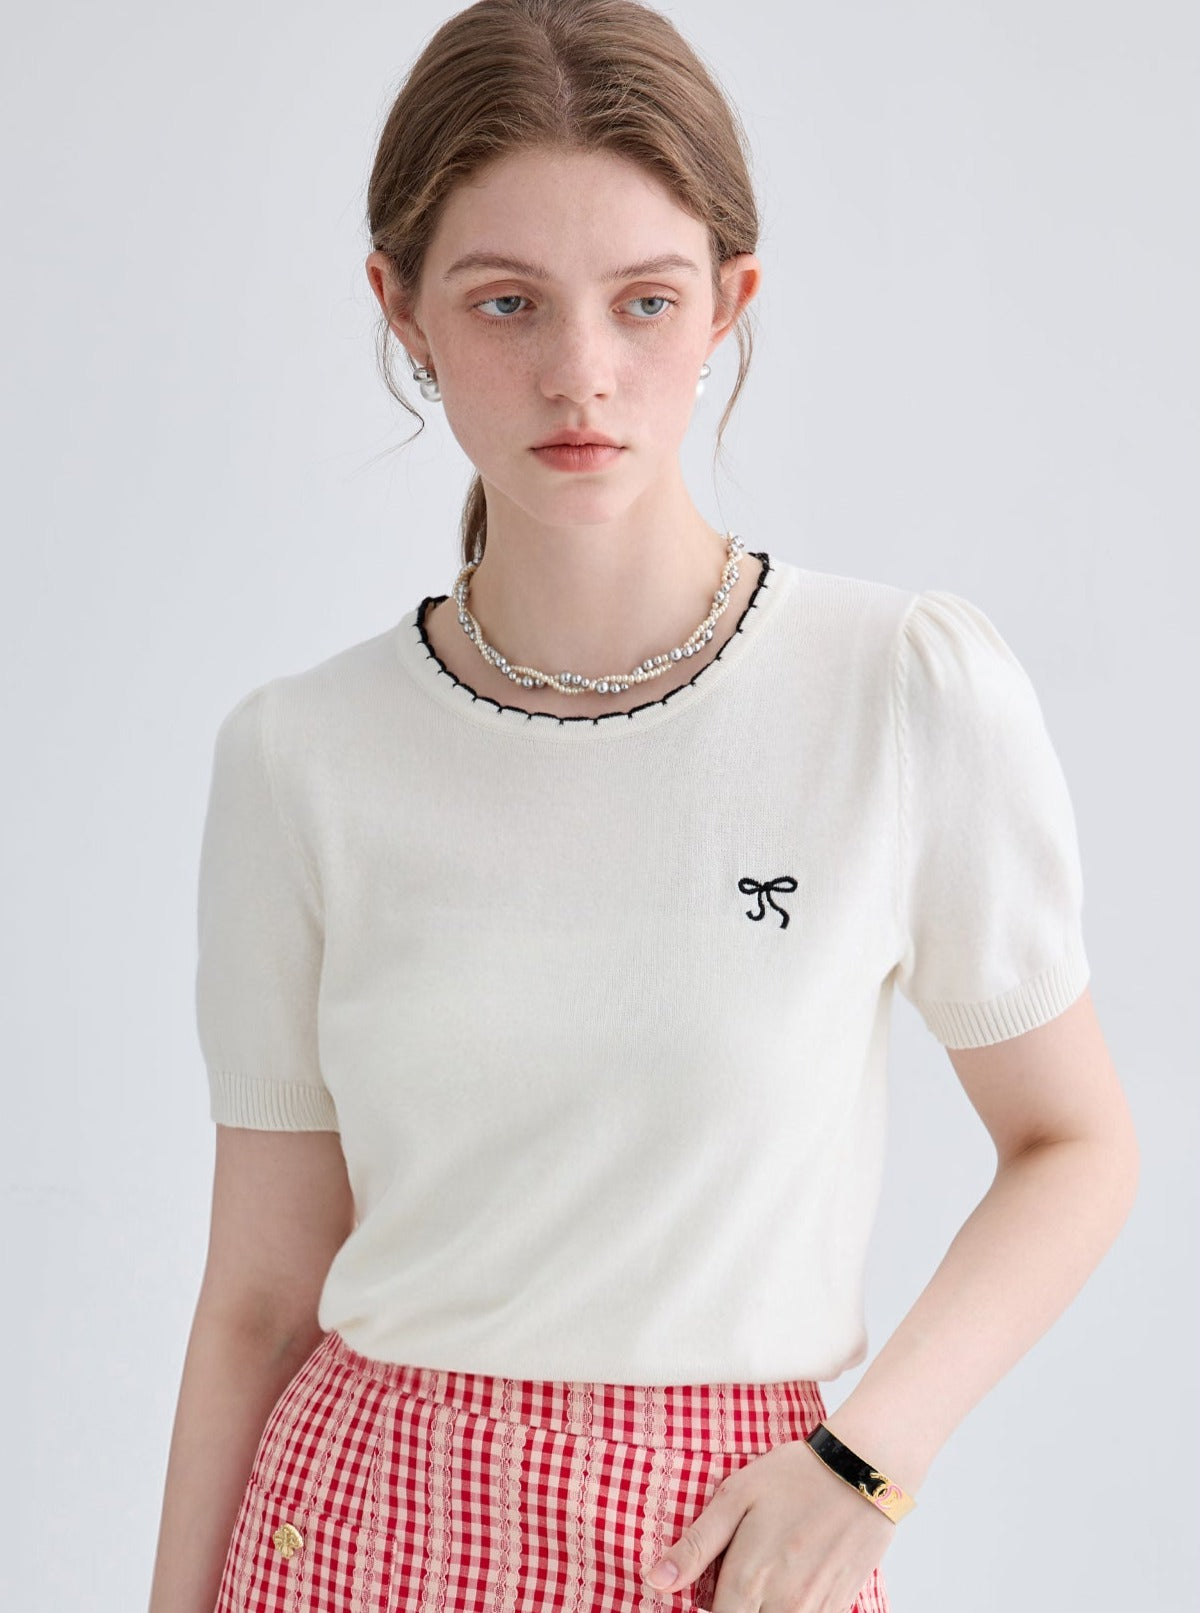 Versatile Embroidered Knitwear Top